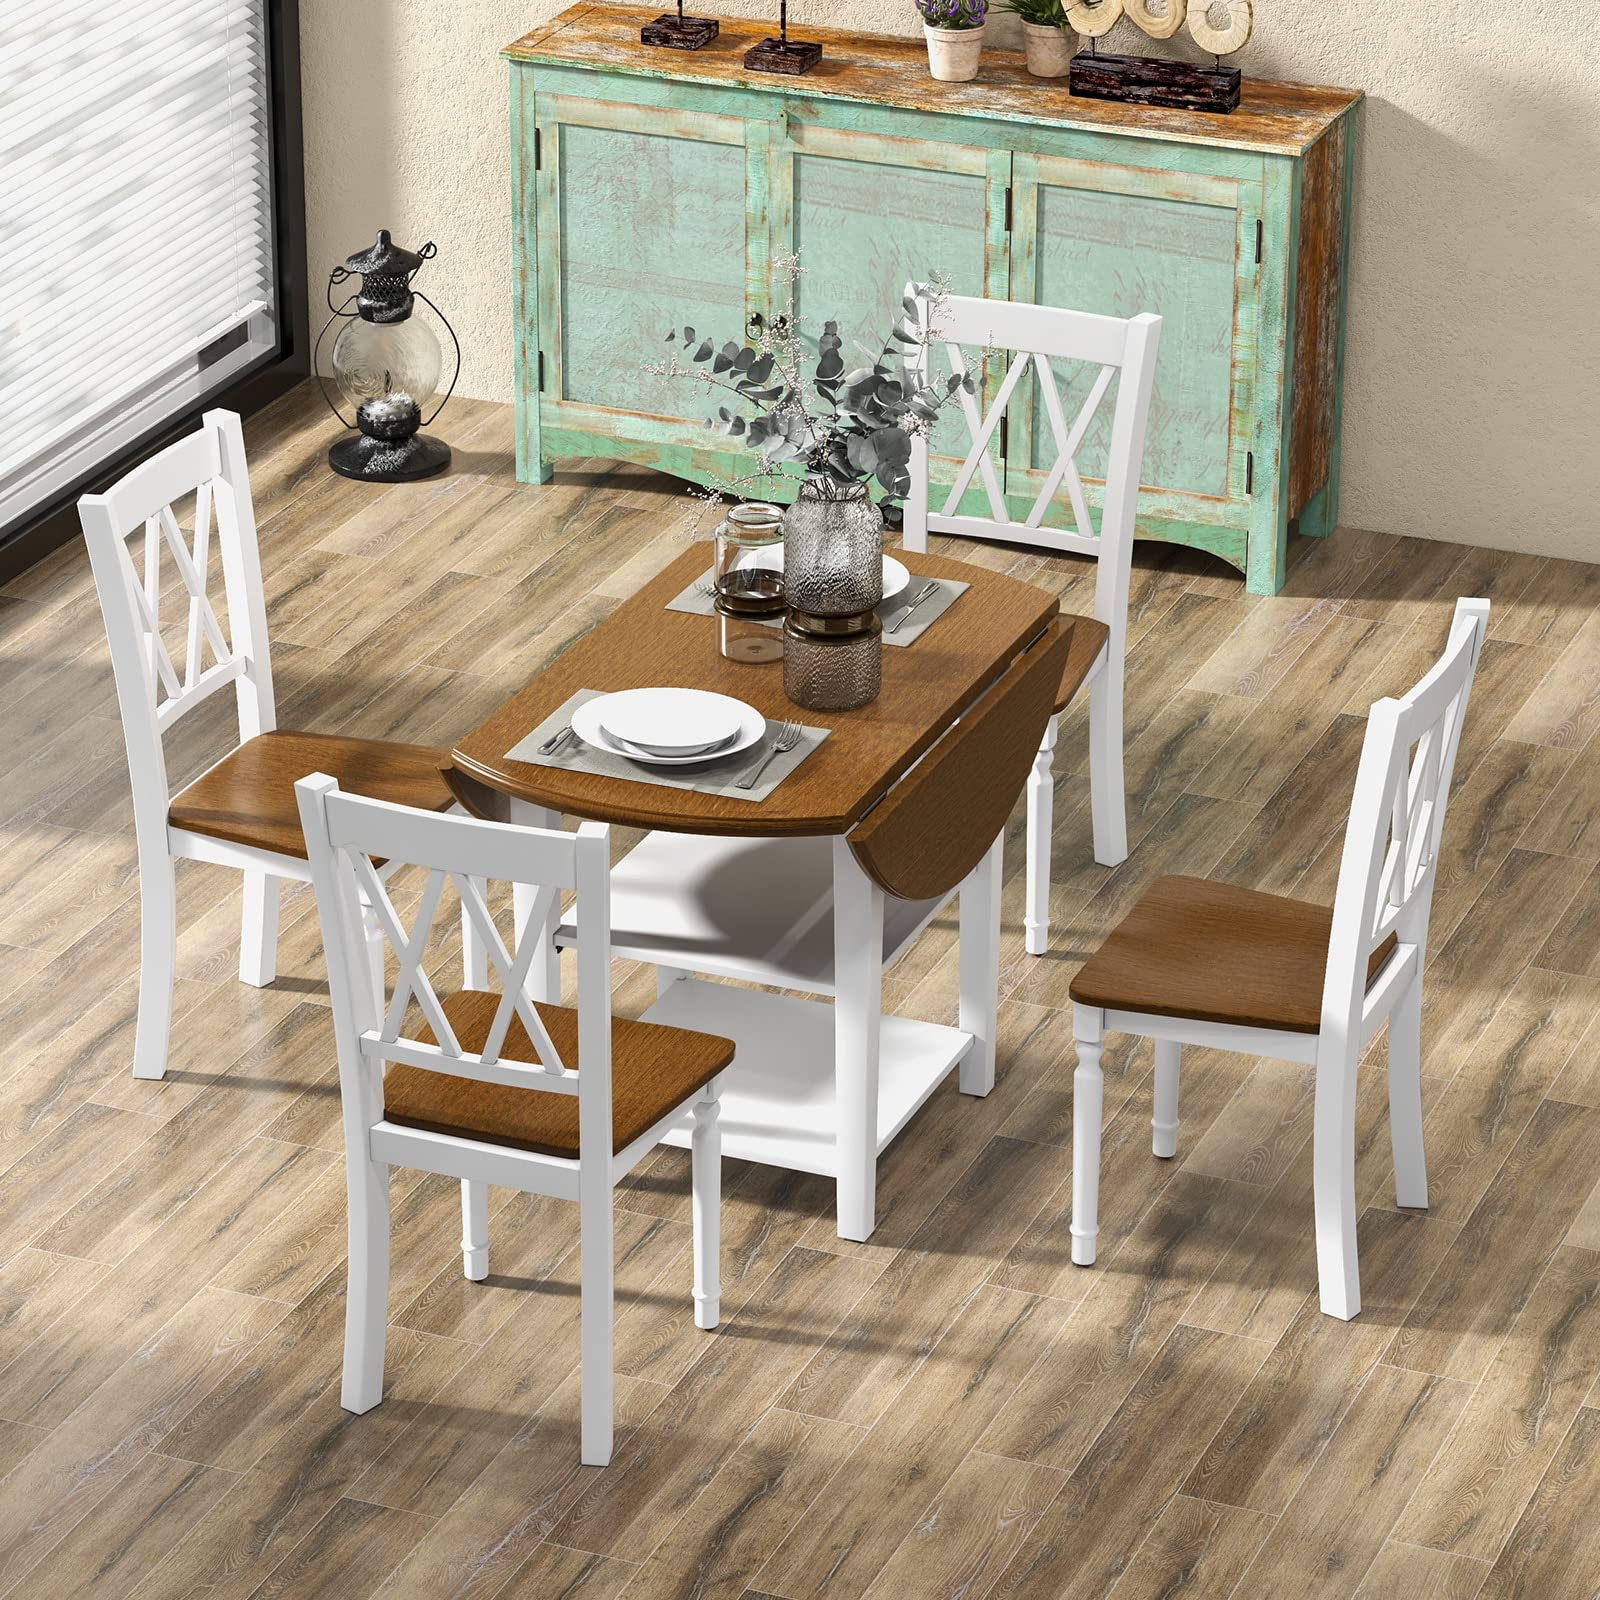 Giantex Dining Table Set for 4 w/Drop Leaf Round Kitchen Table & 4 Chairs, Dining Room Table w/Storage